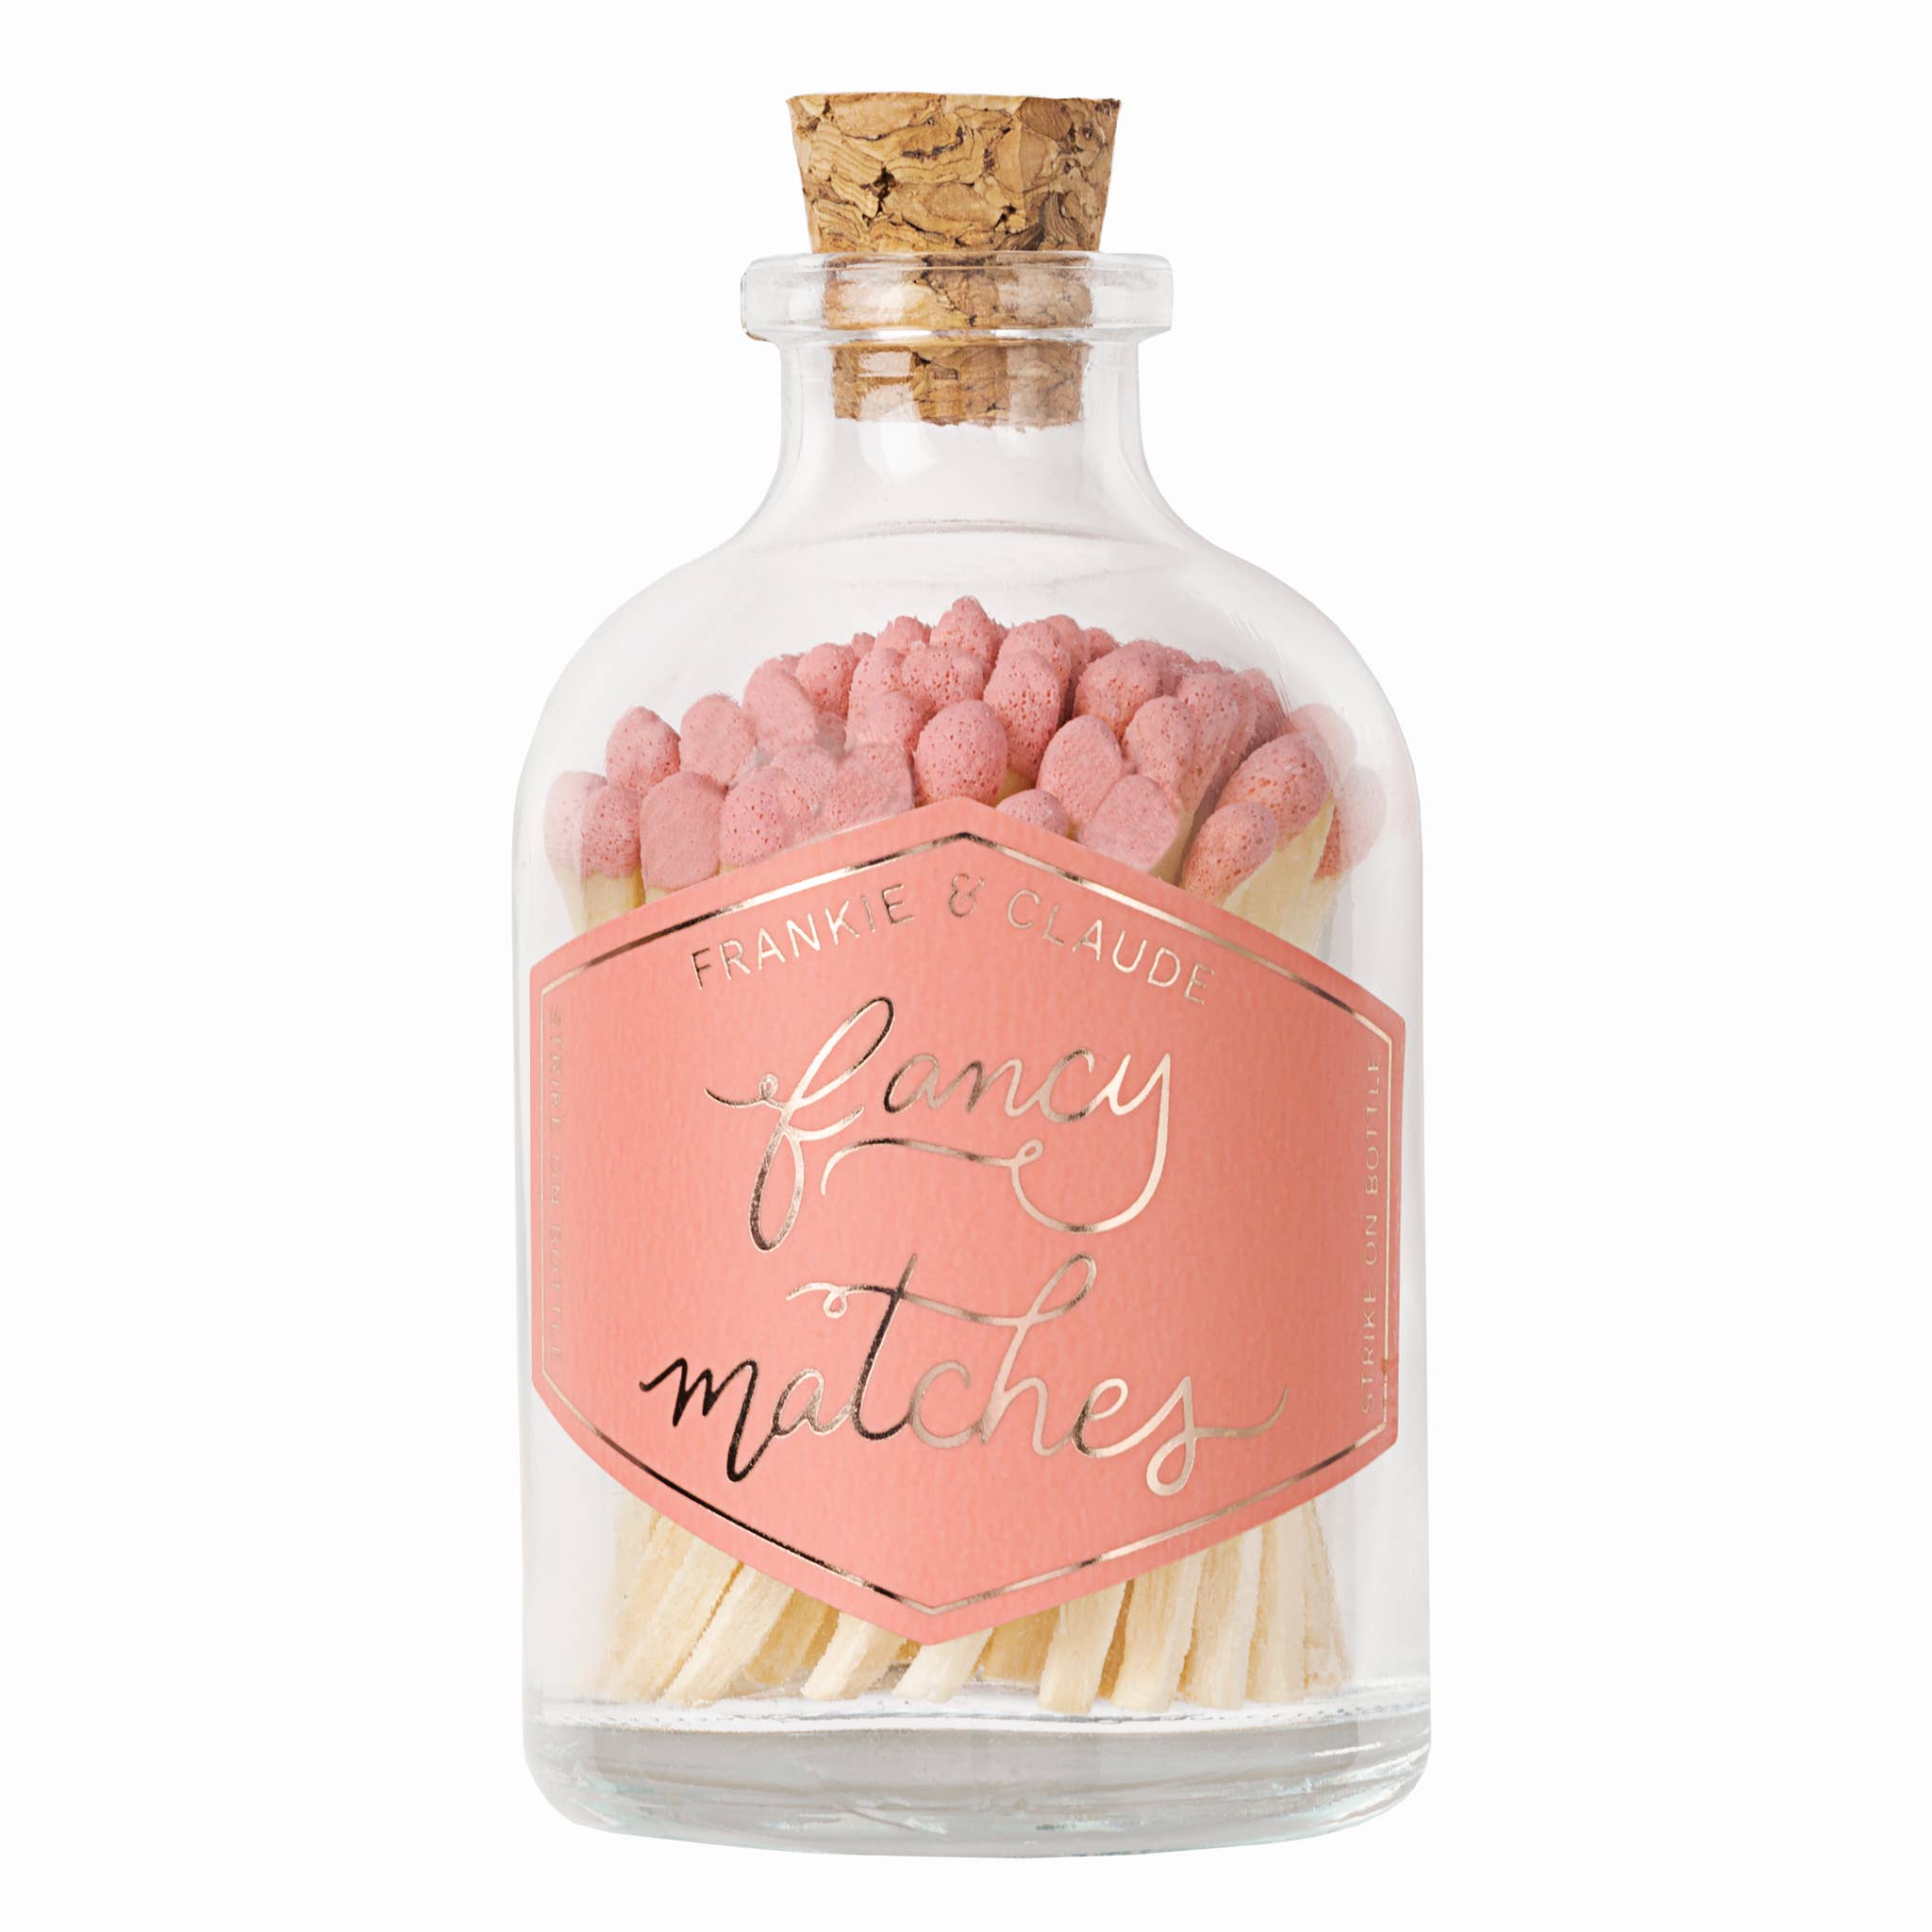 Frankie & Claude - Fancy Matches: Strawberry Pink Small Match Jar